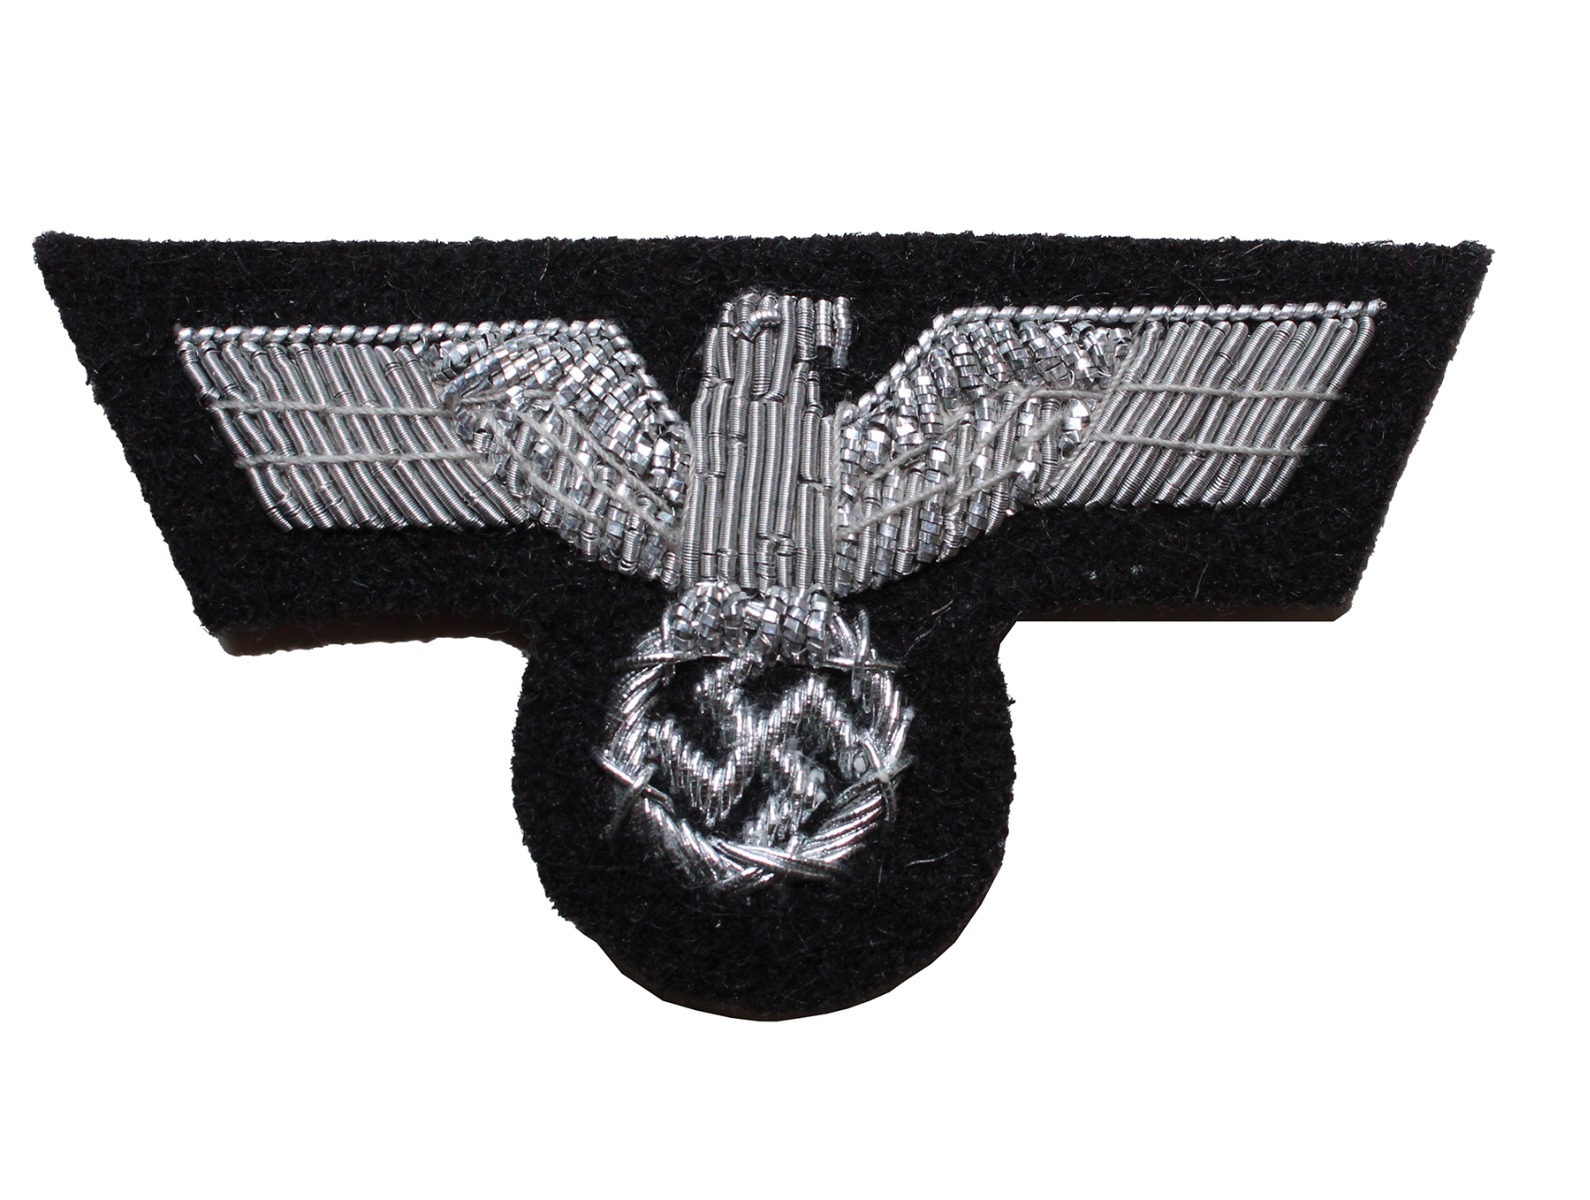 GERMAN ARMY OFFICERS PANZER CAP EAGLE